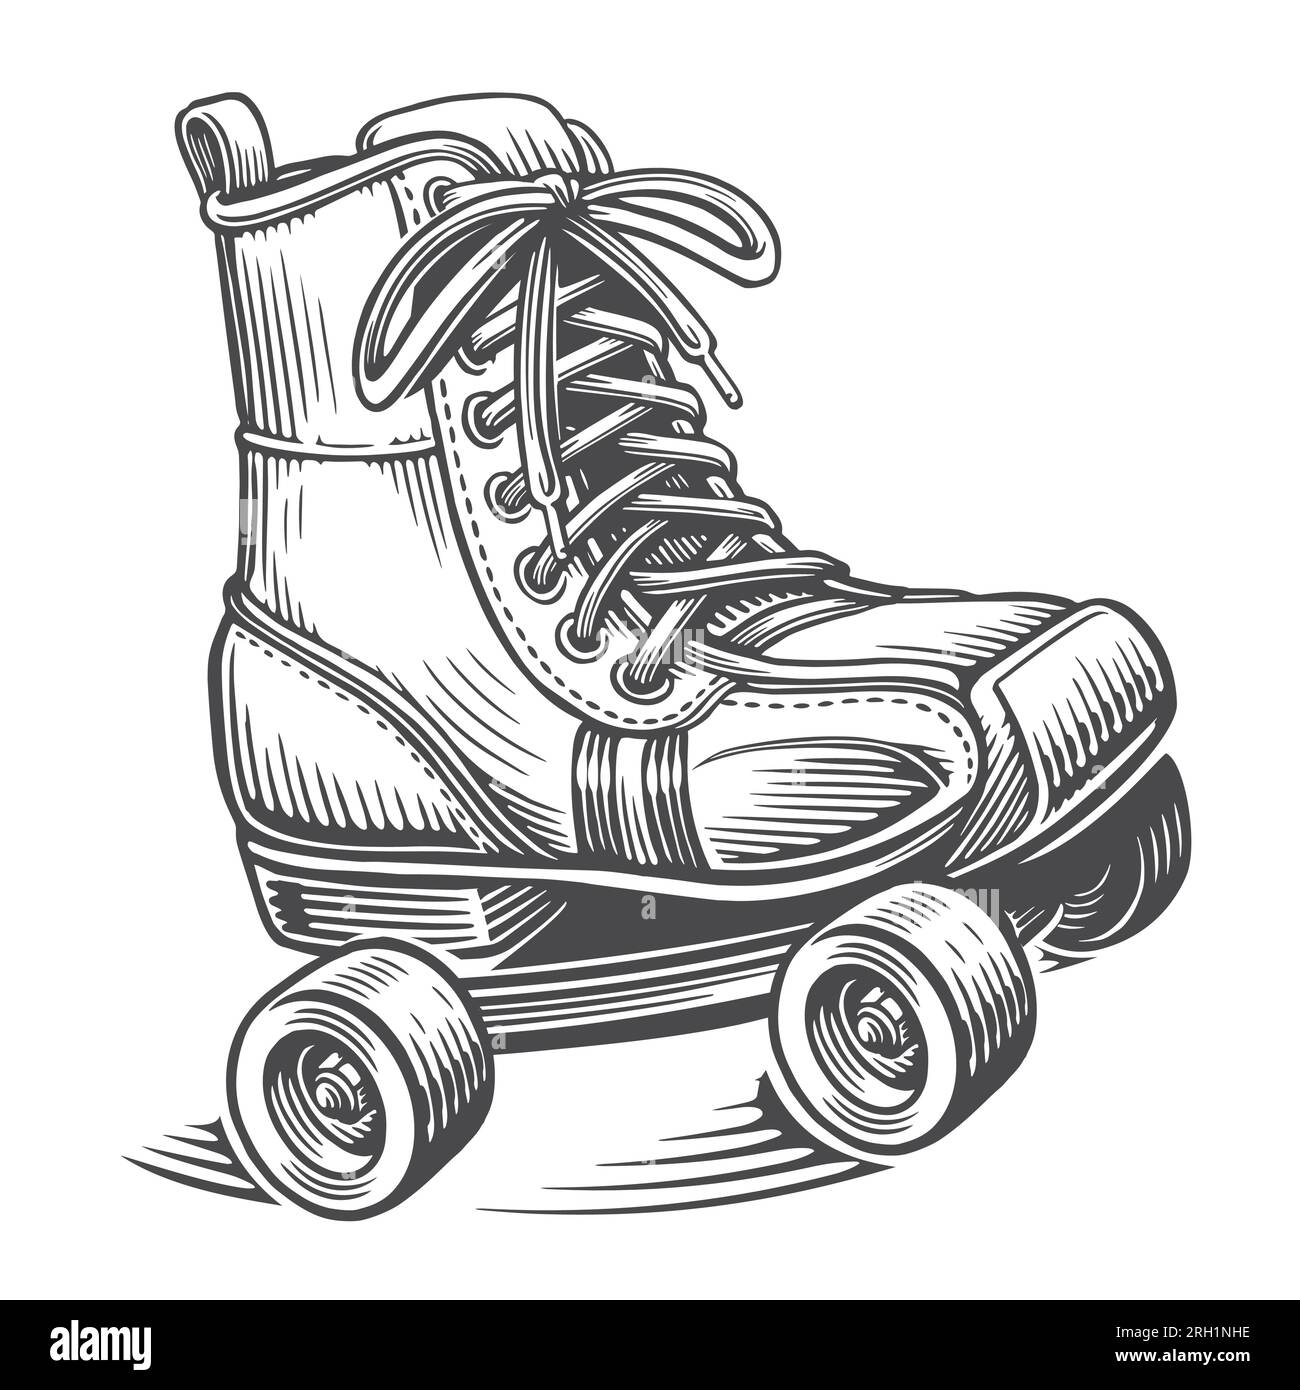 Hand drawn retro roller skates with lace. Rollerblades engraving style. Vintage sketch vector illustration Stock Vector